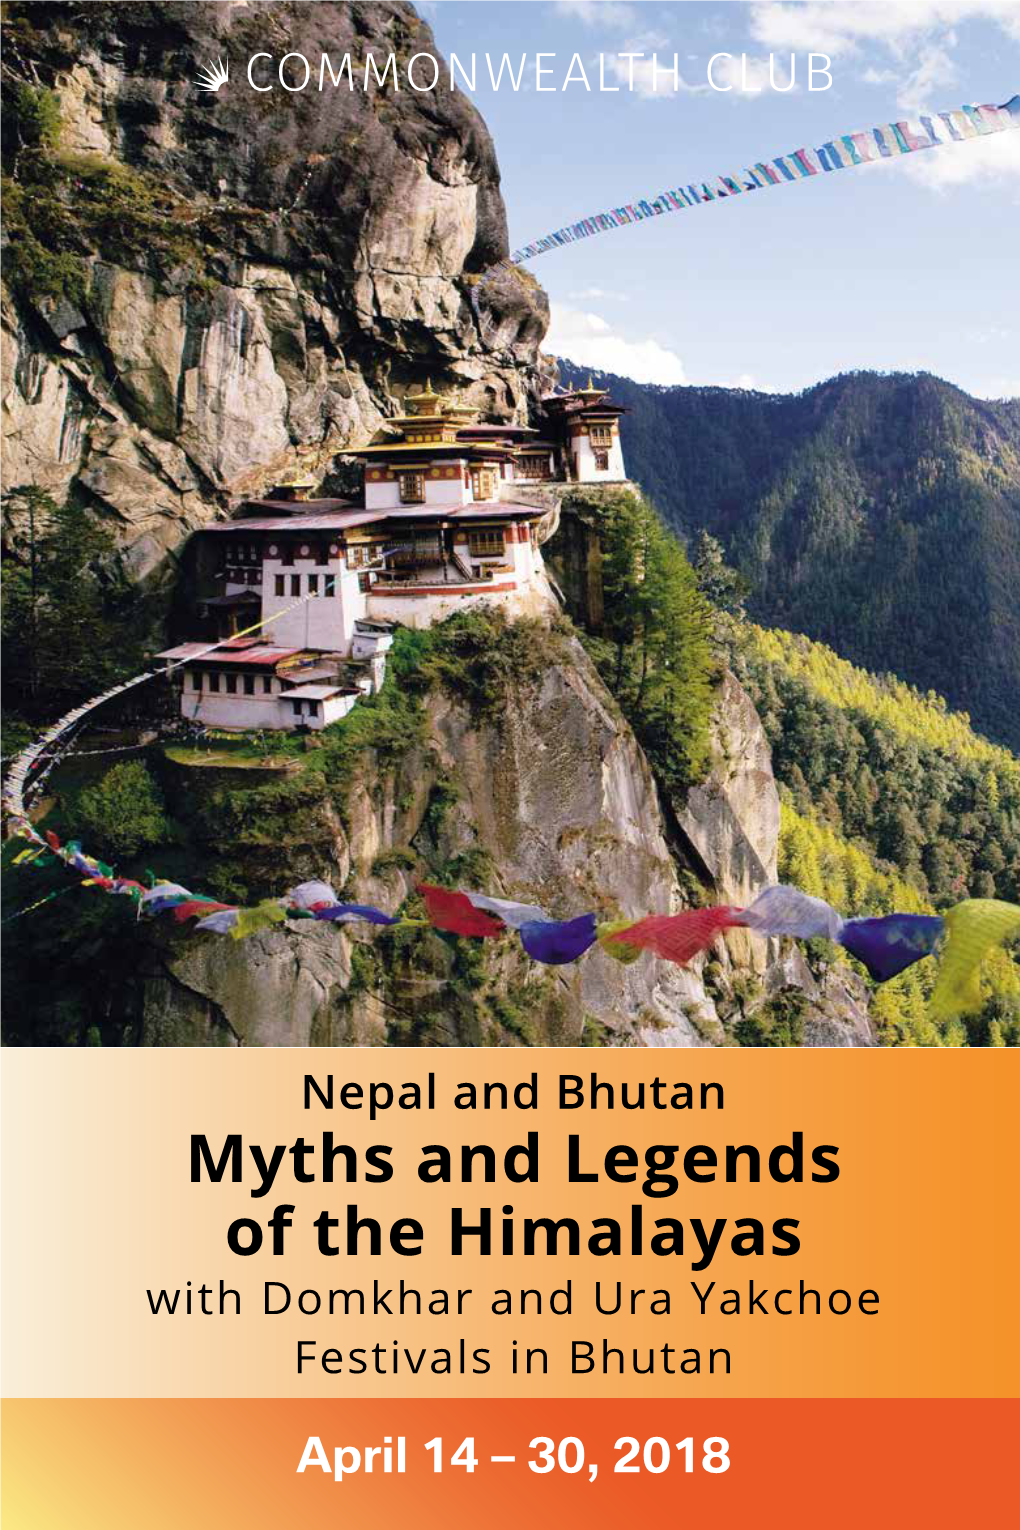 Myths and Legends of the Himalayas with Domkhar and Ura Yakchoe Festivals in Bhutan